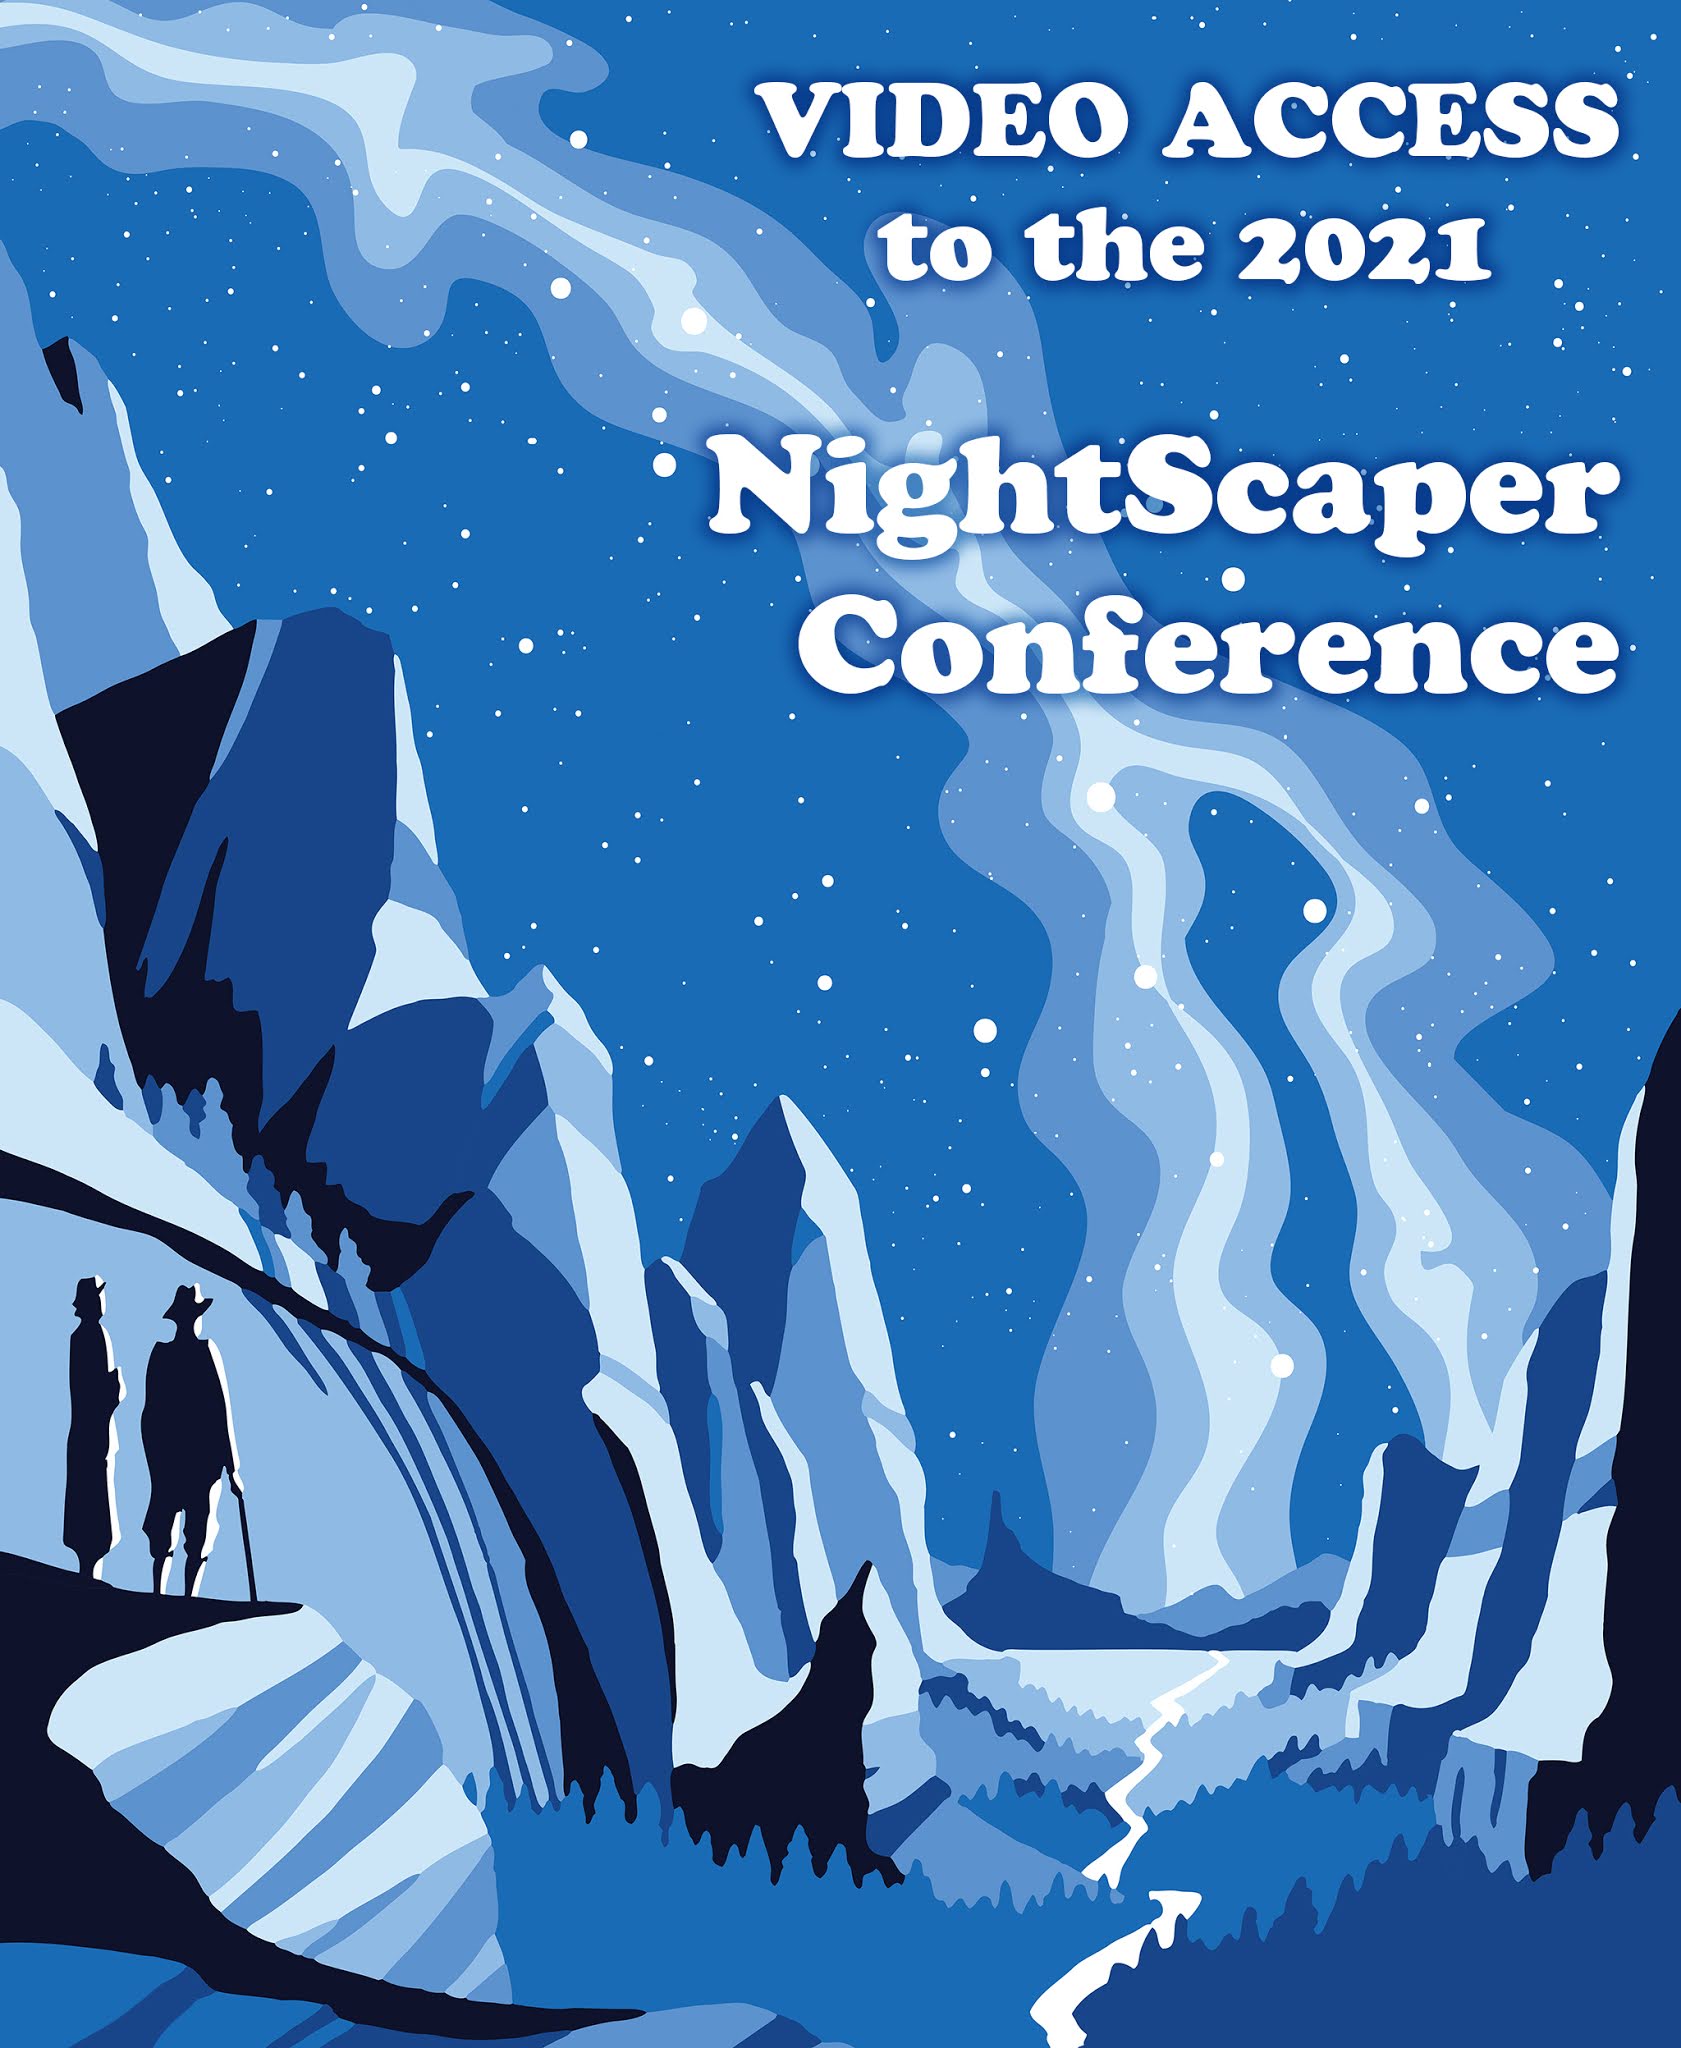 Aaron King to host weekly pre-conference livestreams with Nightscaper  speakers — Nightscaper Photo Conference